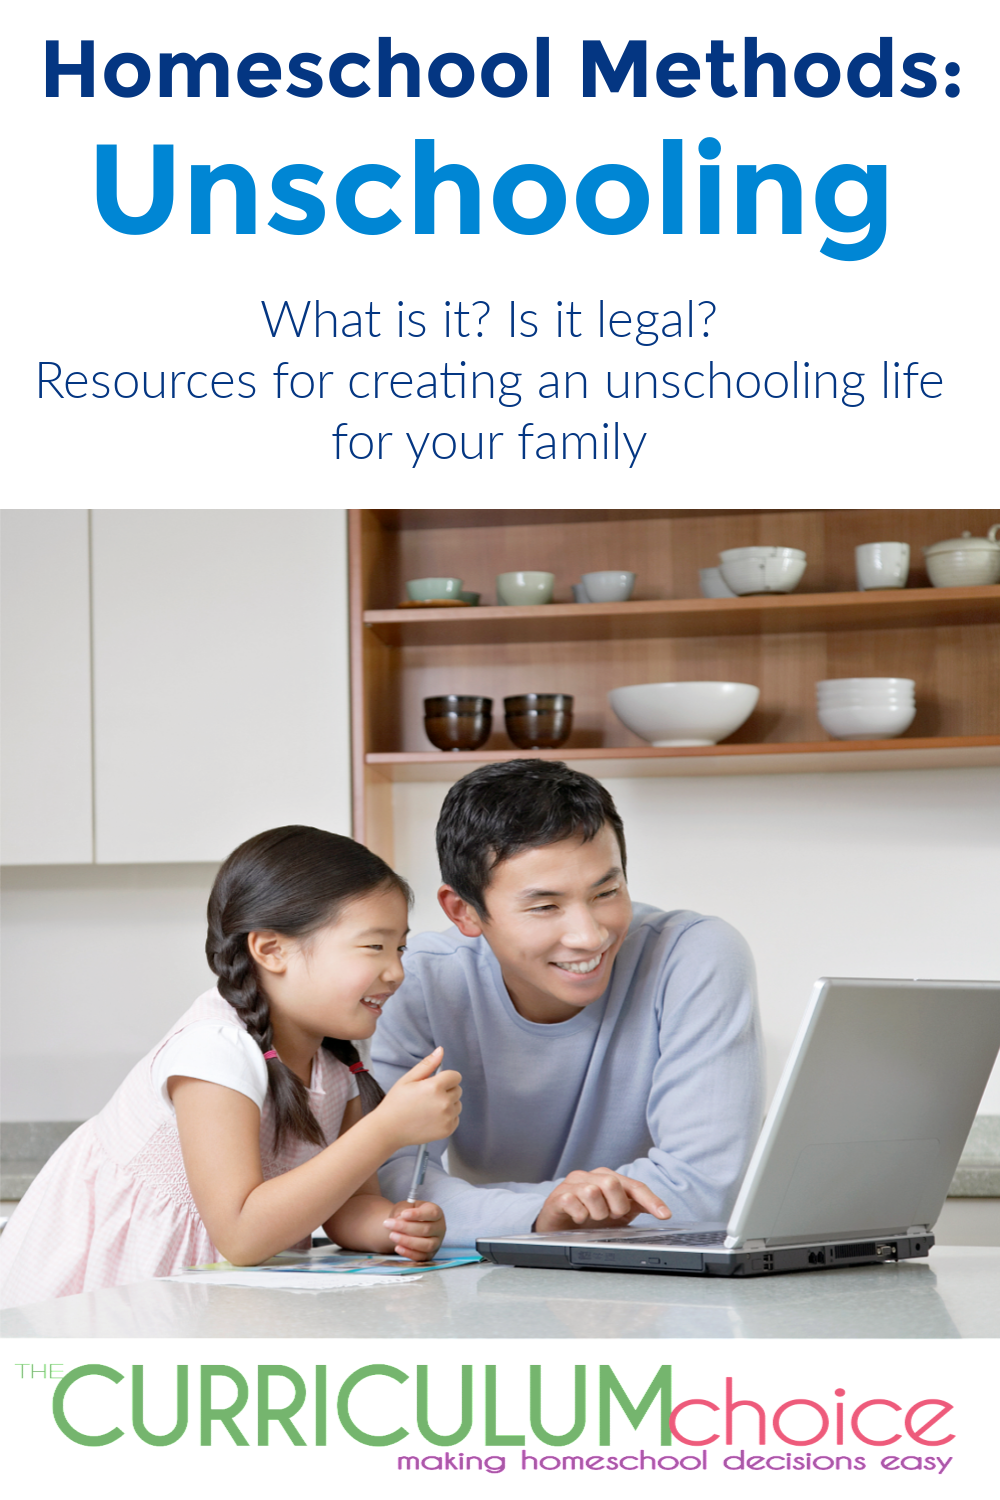 Unschooling is different from the other homeschool methods because it is child led learning through life and their natural curiosities. In this article we will talk about: what exactly unschooling is, answer the question of its legality, and offer resources for helping you to create an unschooling life for your family.